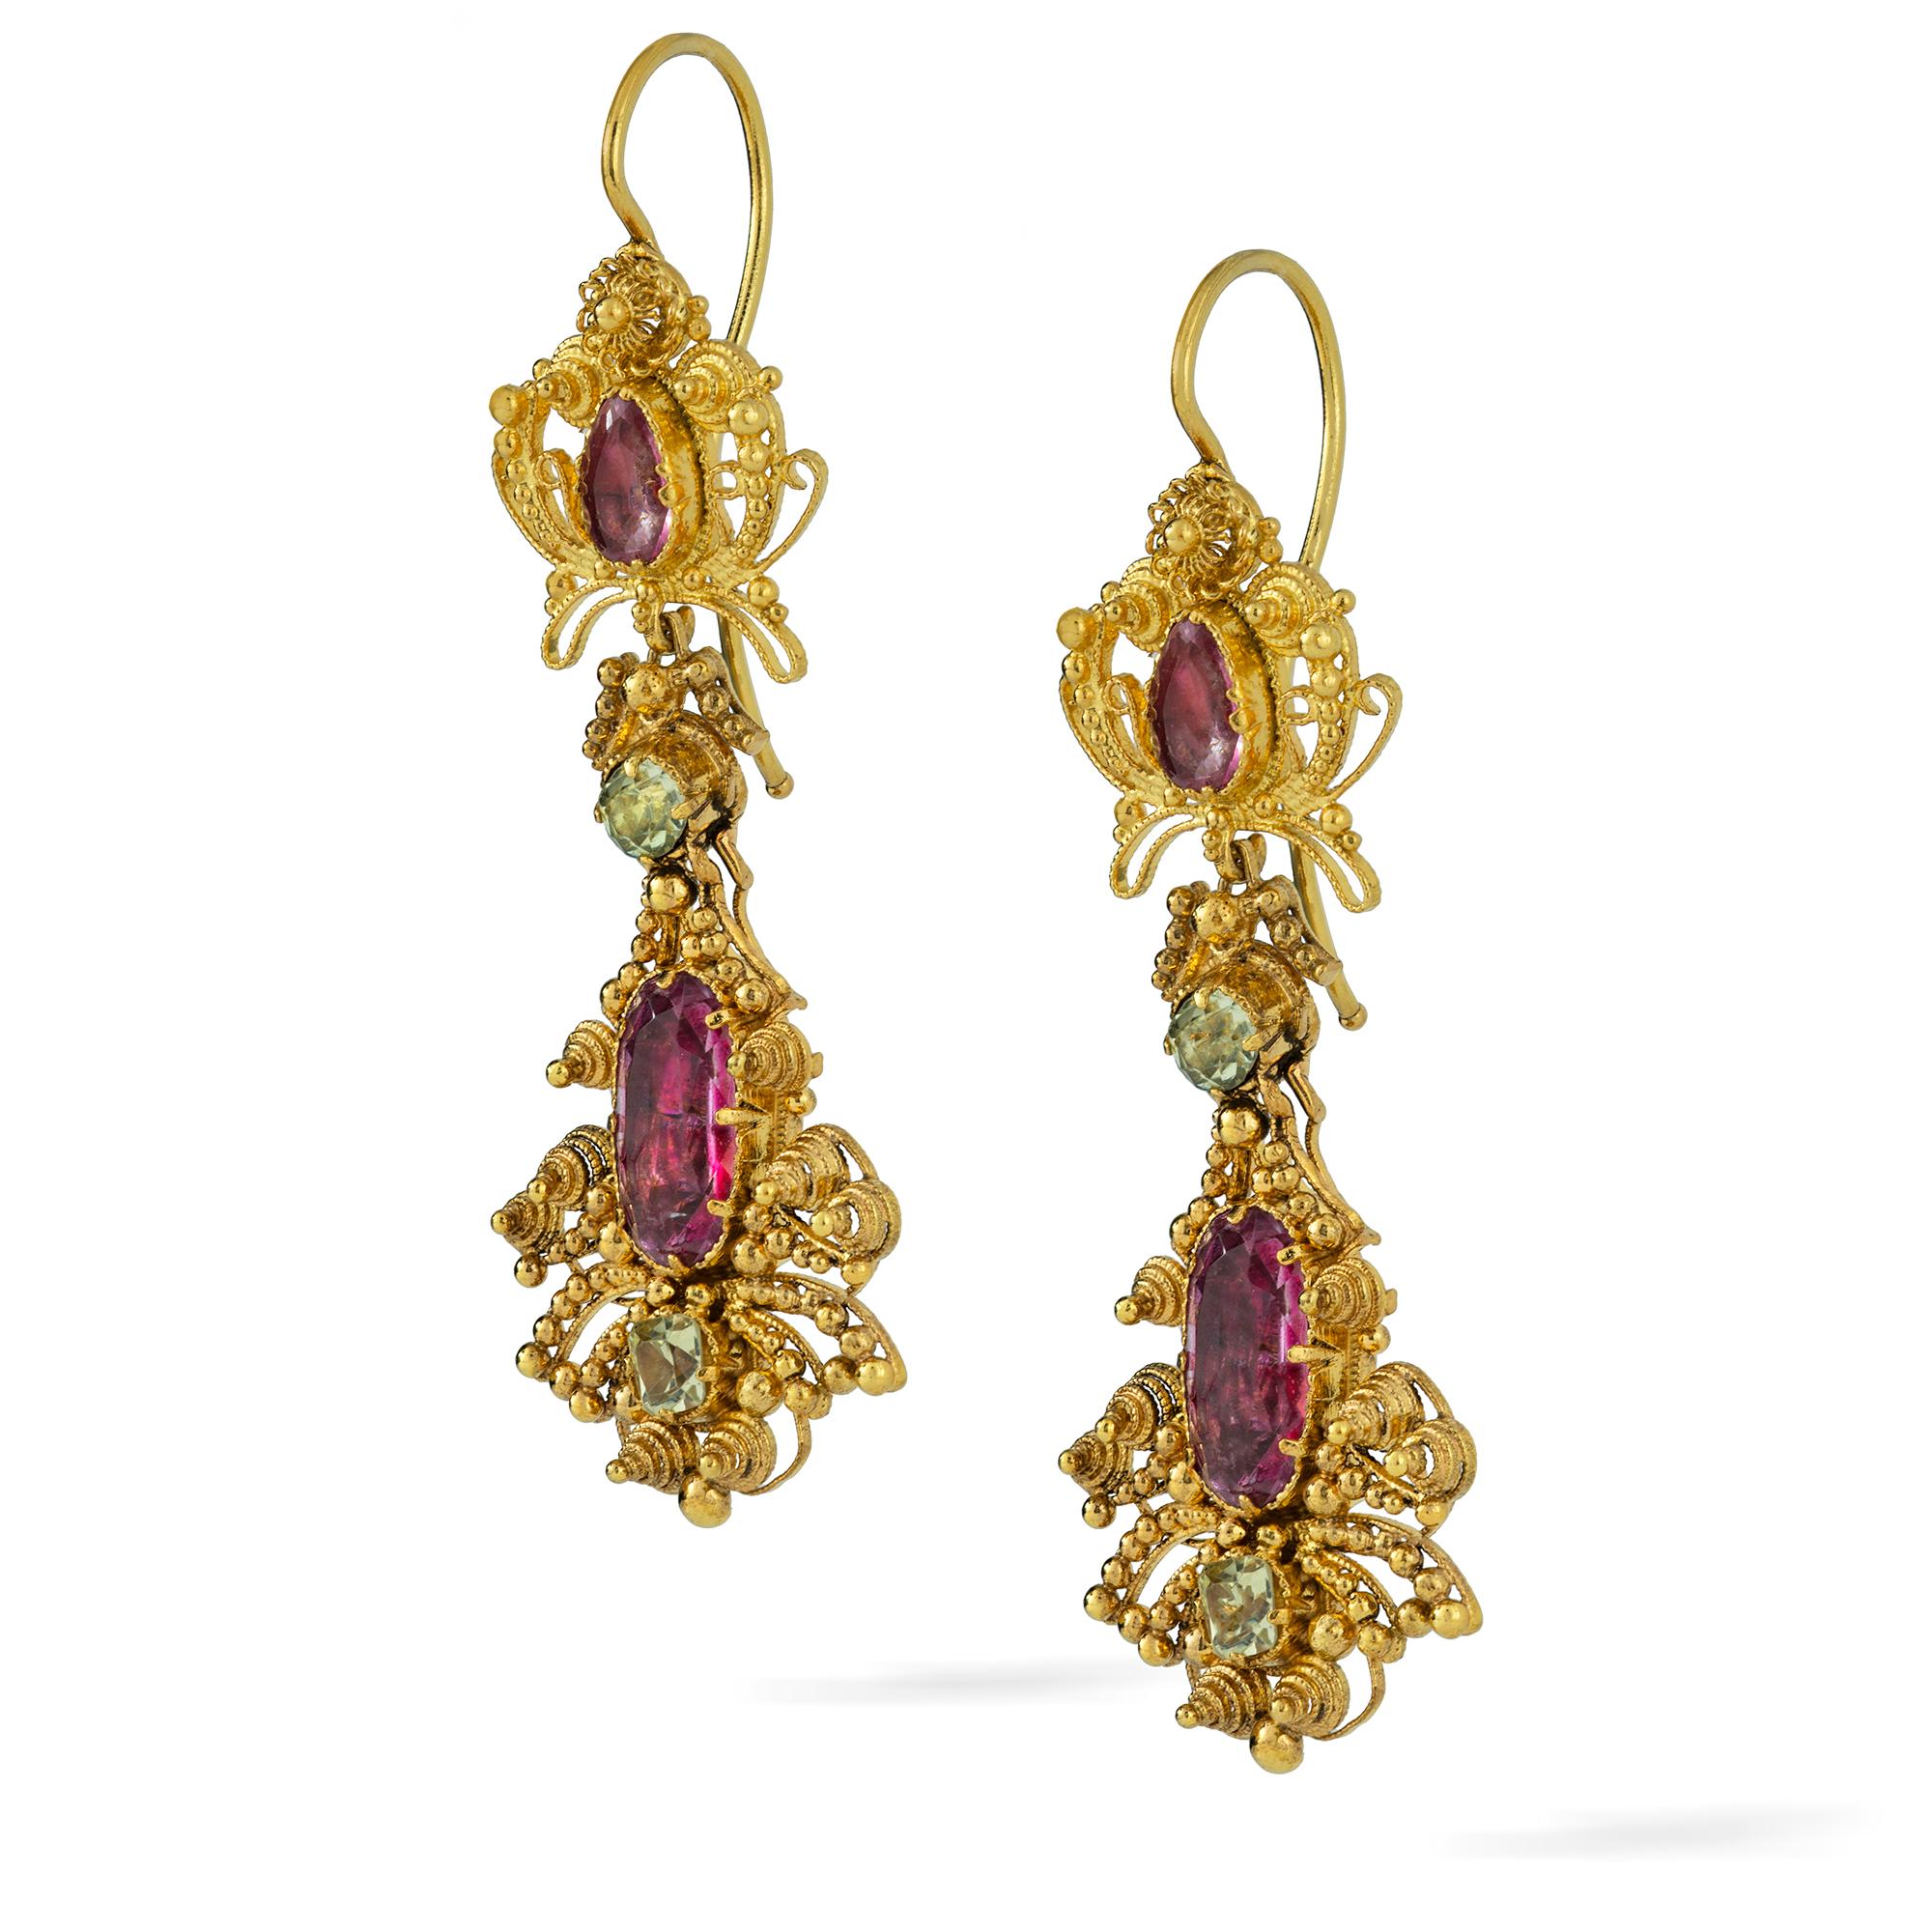 A pair Georgian topaz drop earrings, the top set with a pear-shaped pink topaz, surrounded by gold filigree decorations, suspending a larger oval pink topaz in a similar surround, the topazes weighing approximately a total of 3.0 carats, with two